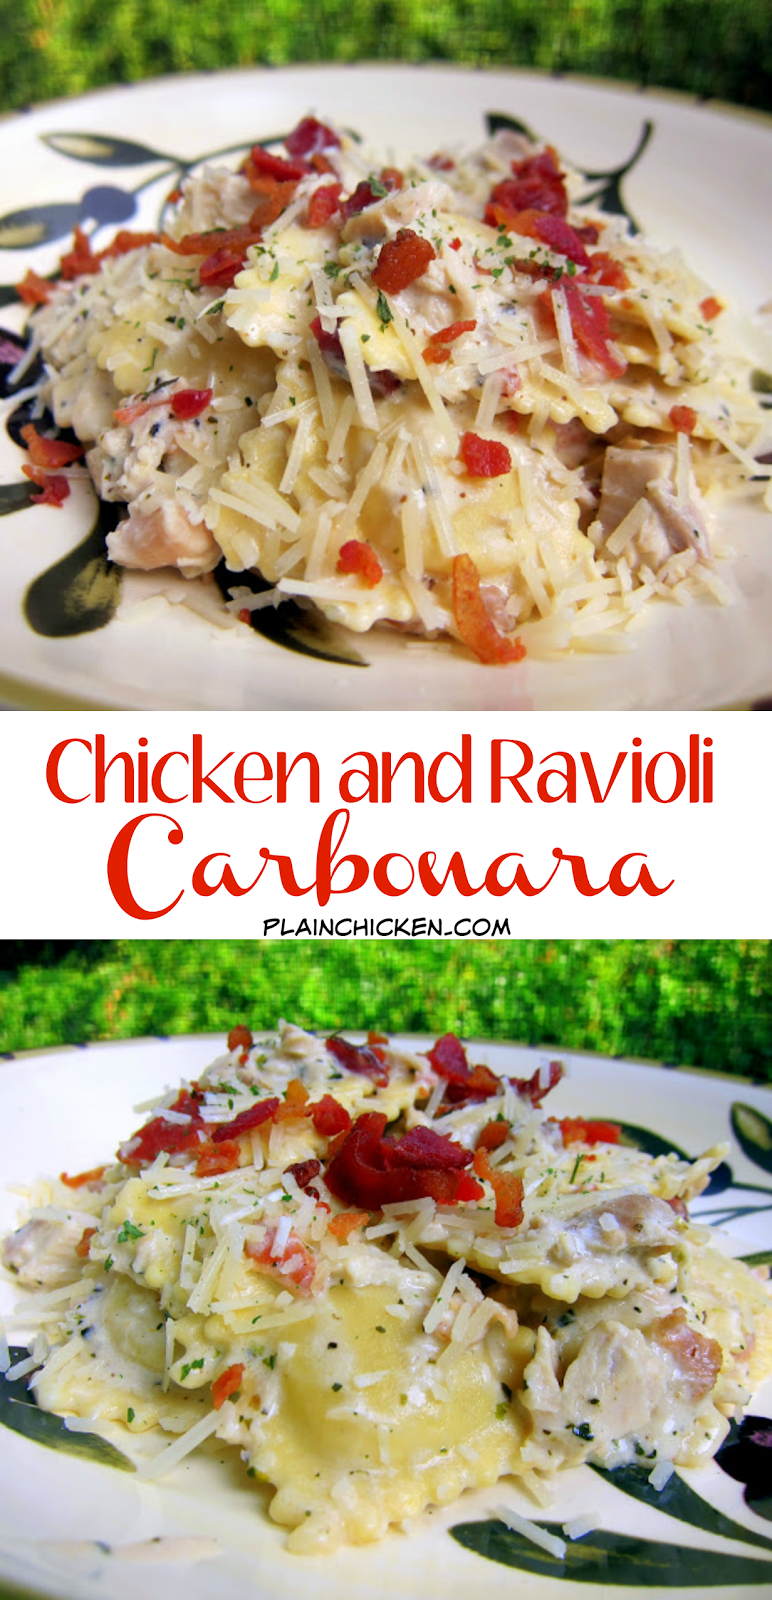 Chicken and Ravioli Carbonara - refrigerated ravioli and chicken tossed in a quick cream sauce and topped with bacon. Ready in under 30 minutes! Great weeknight pasta dish!